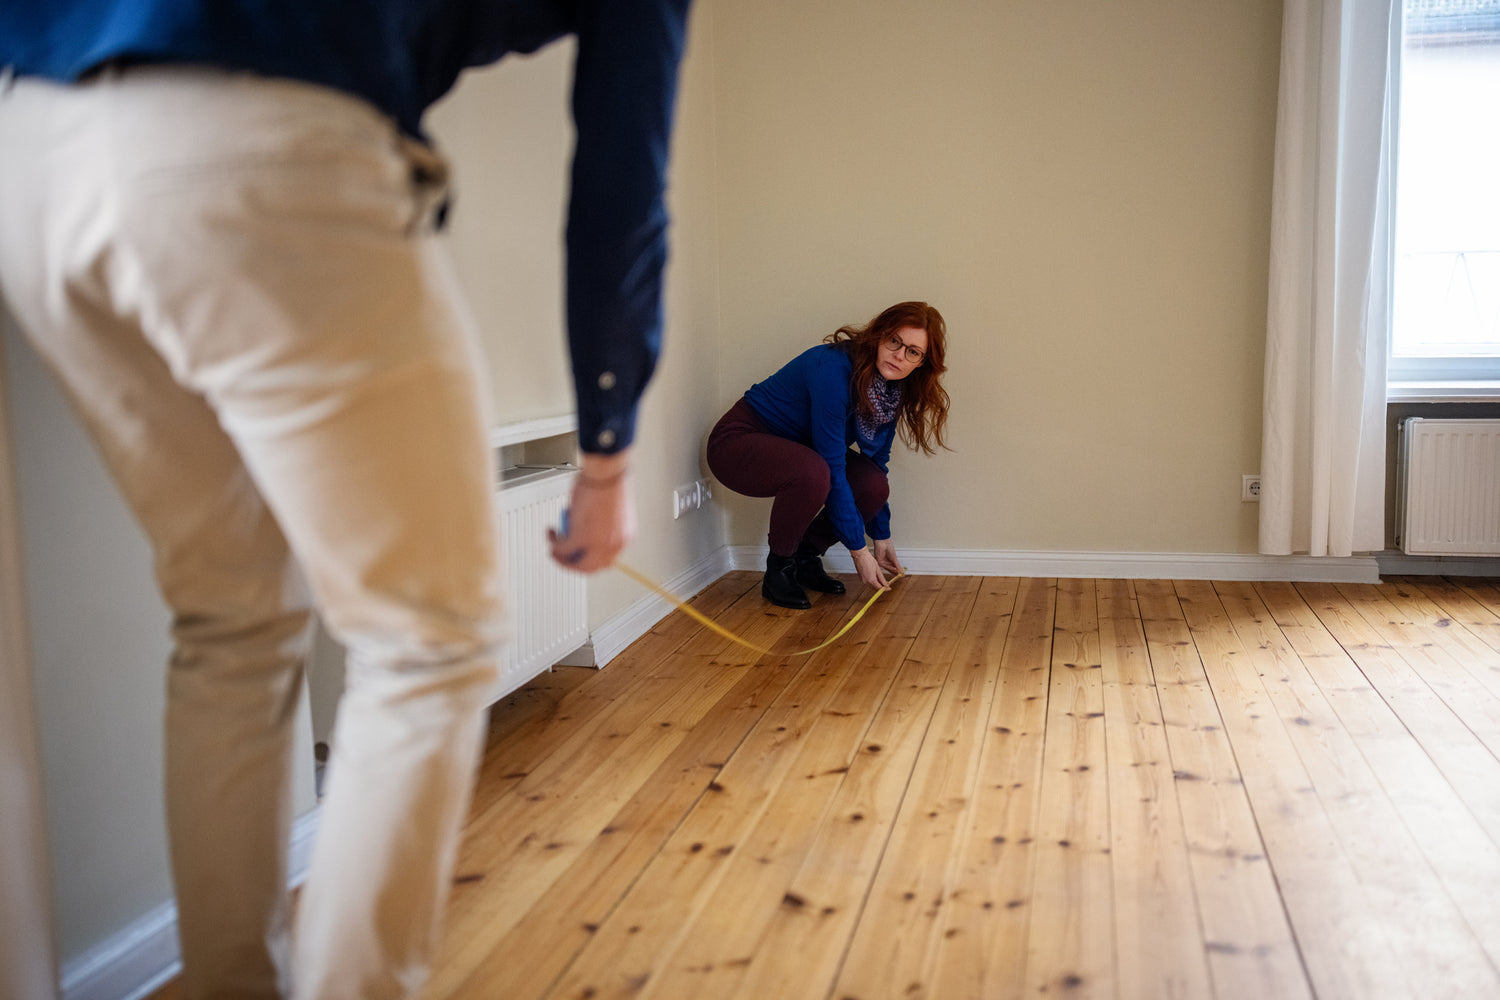 Preview the property - image of people taking measurements of a room